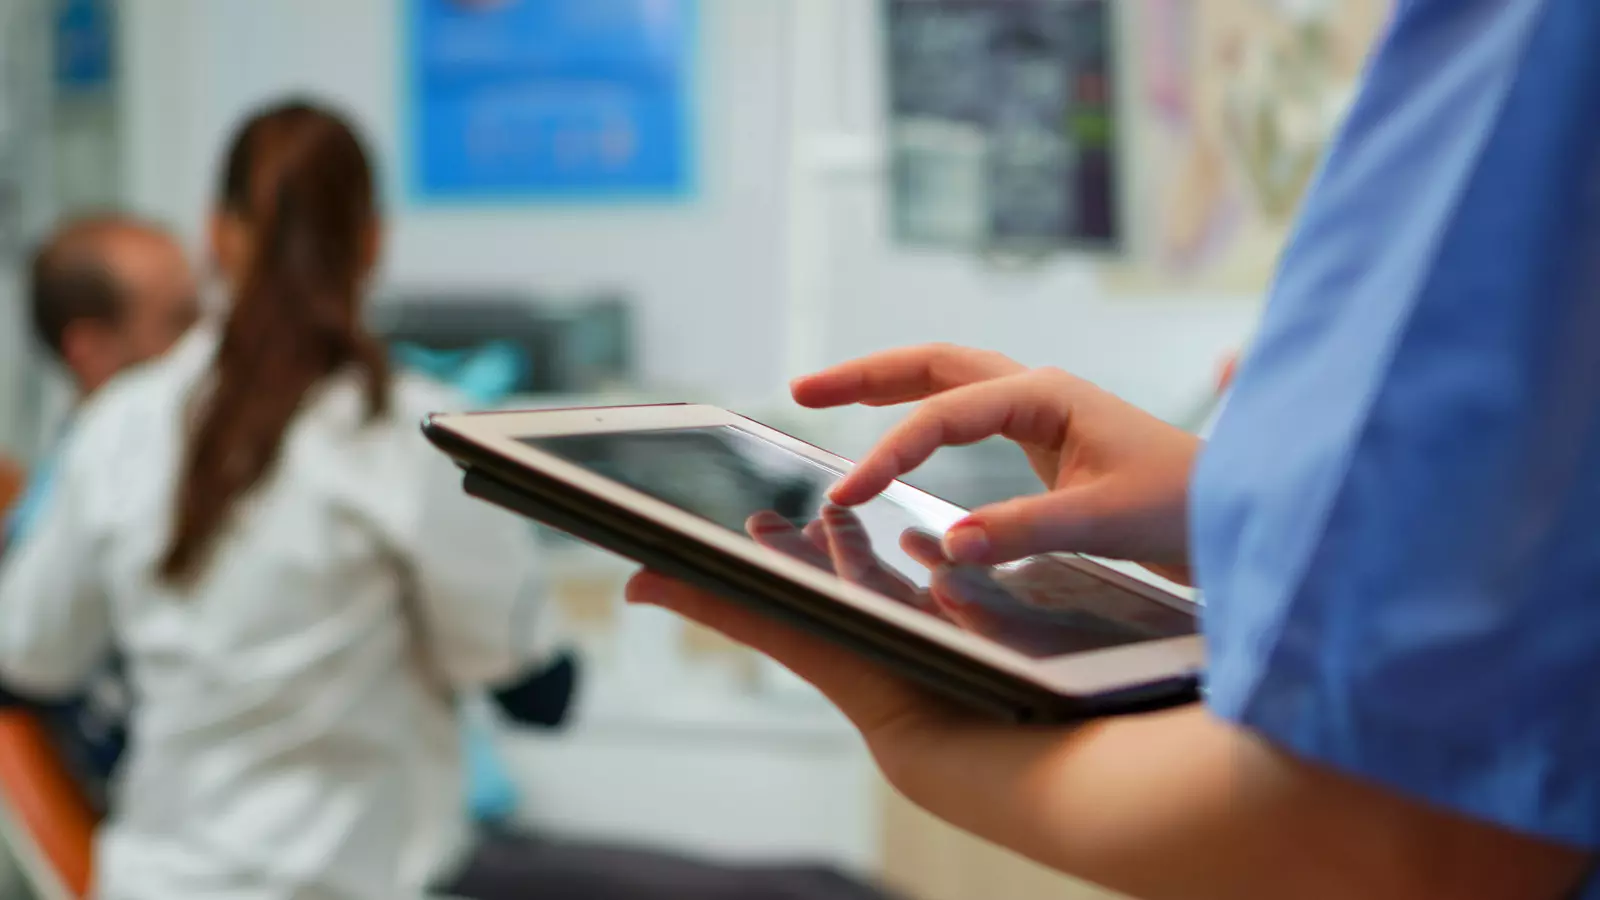 How digital transformation is driving action in healthcare